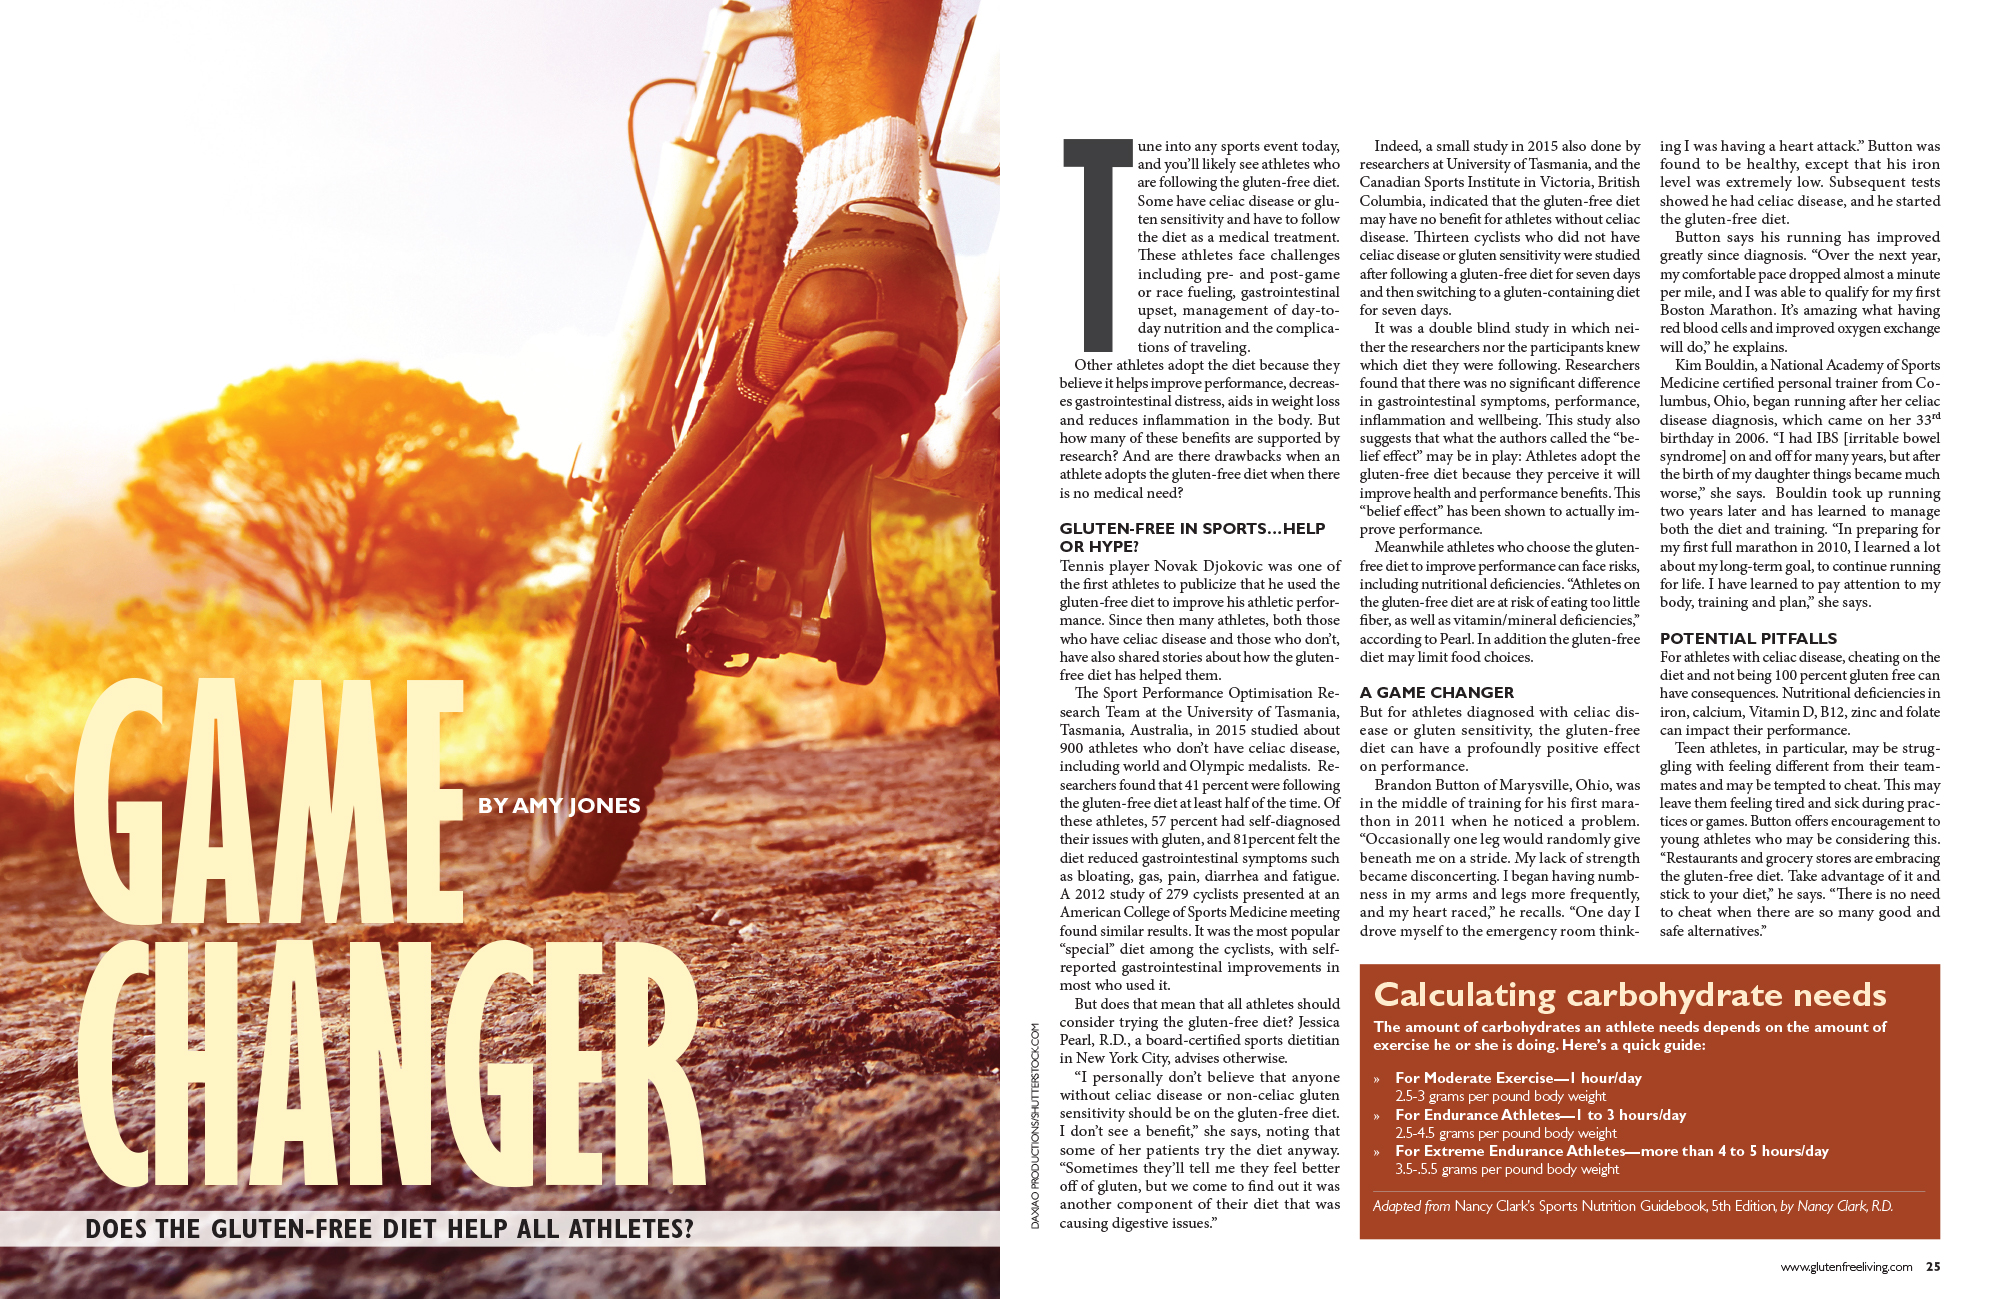 Magazine spread titled "Game changer"